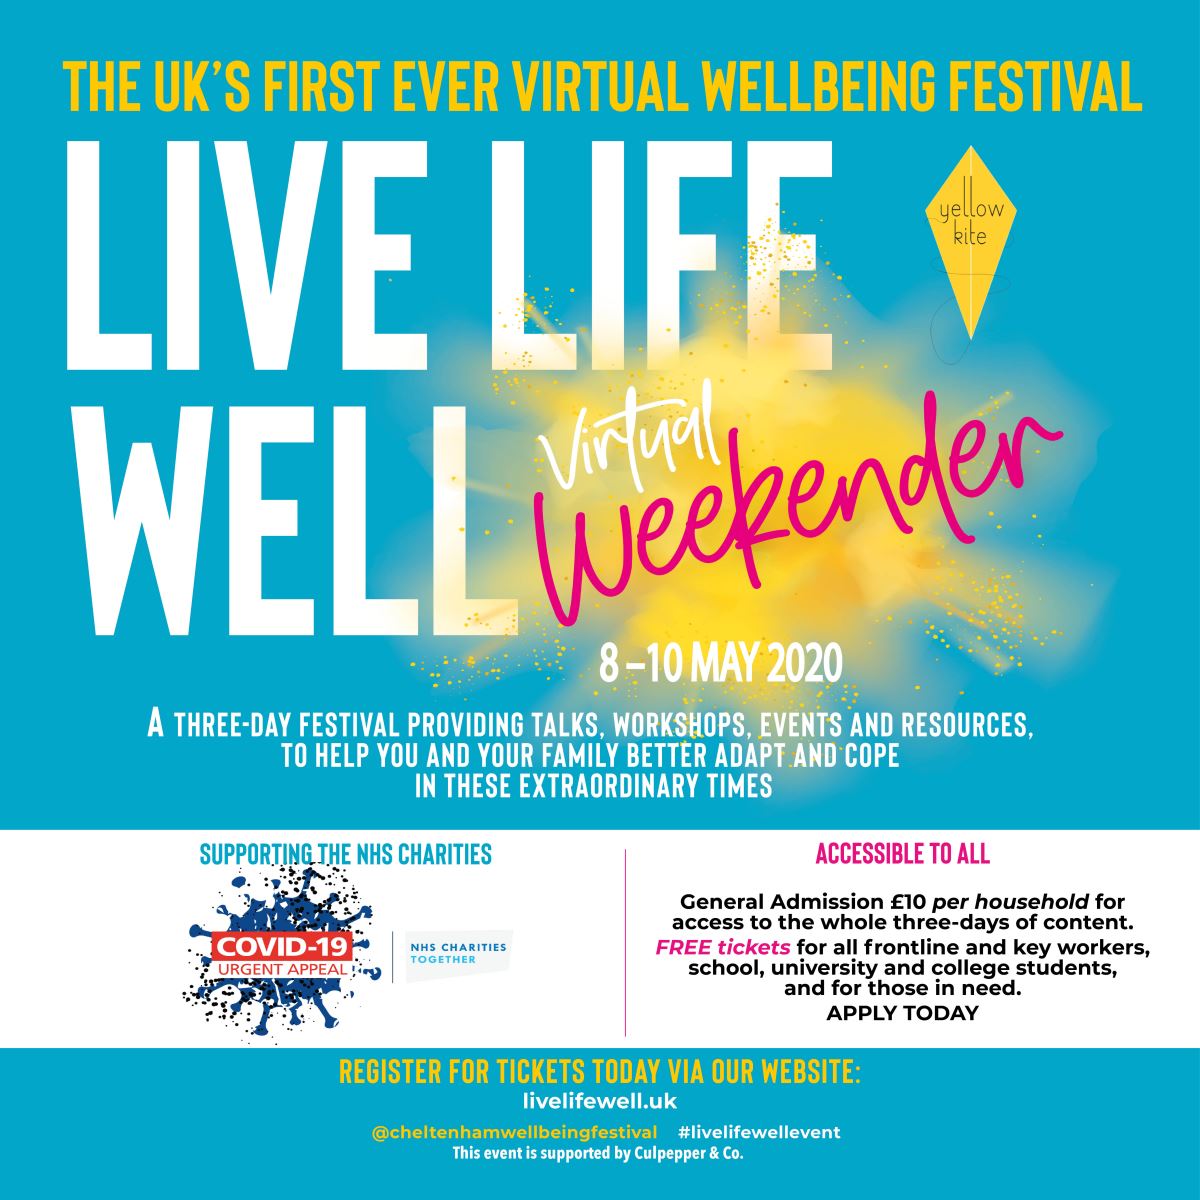 Save the date for virtual wellbeing festival